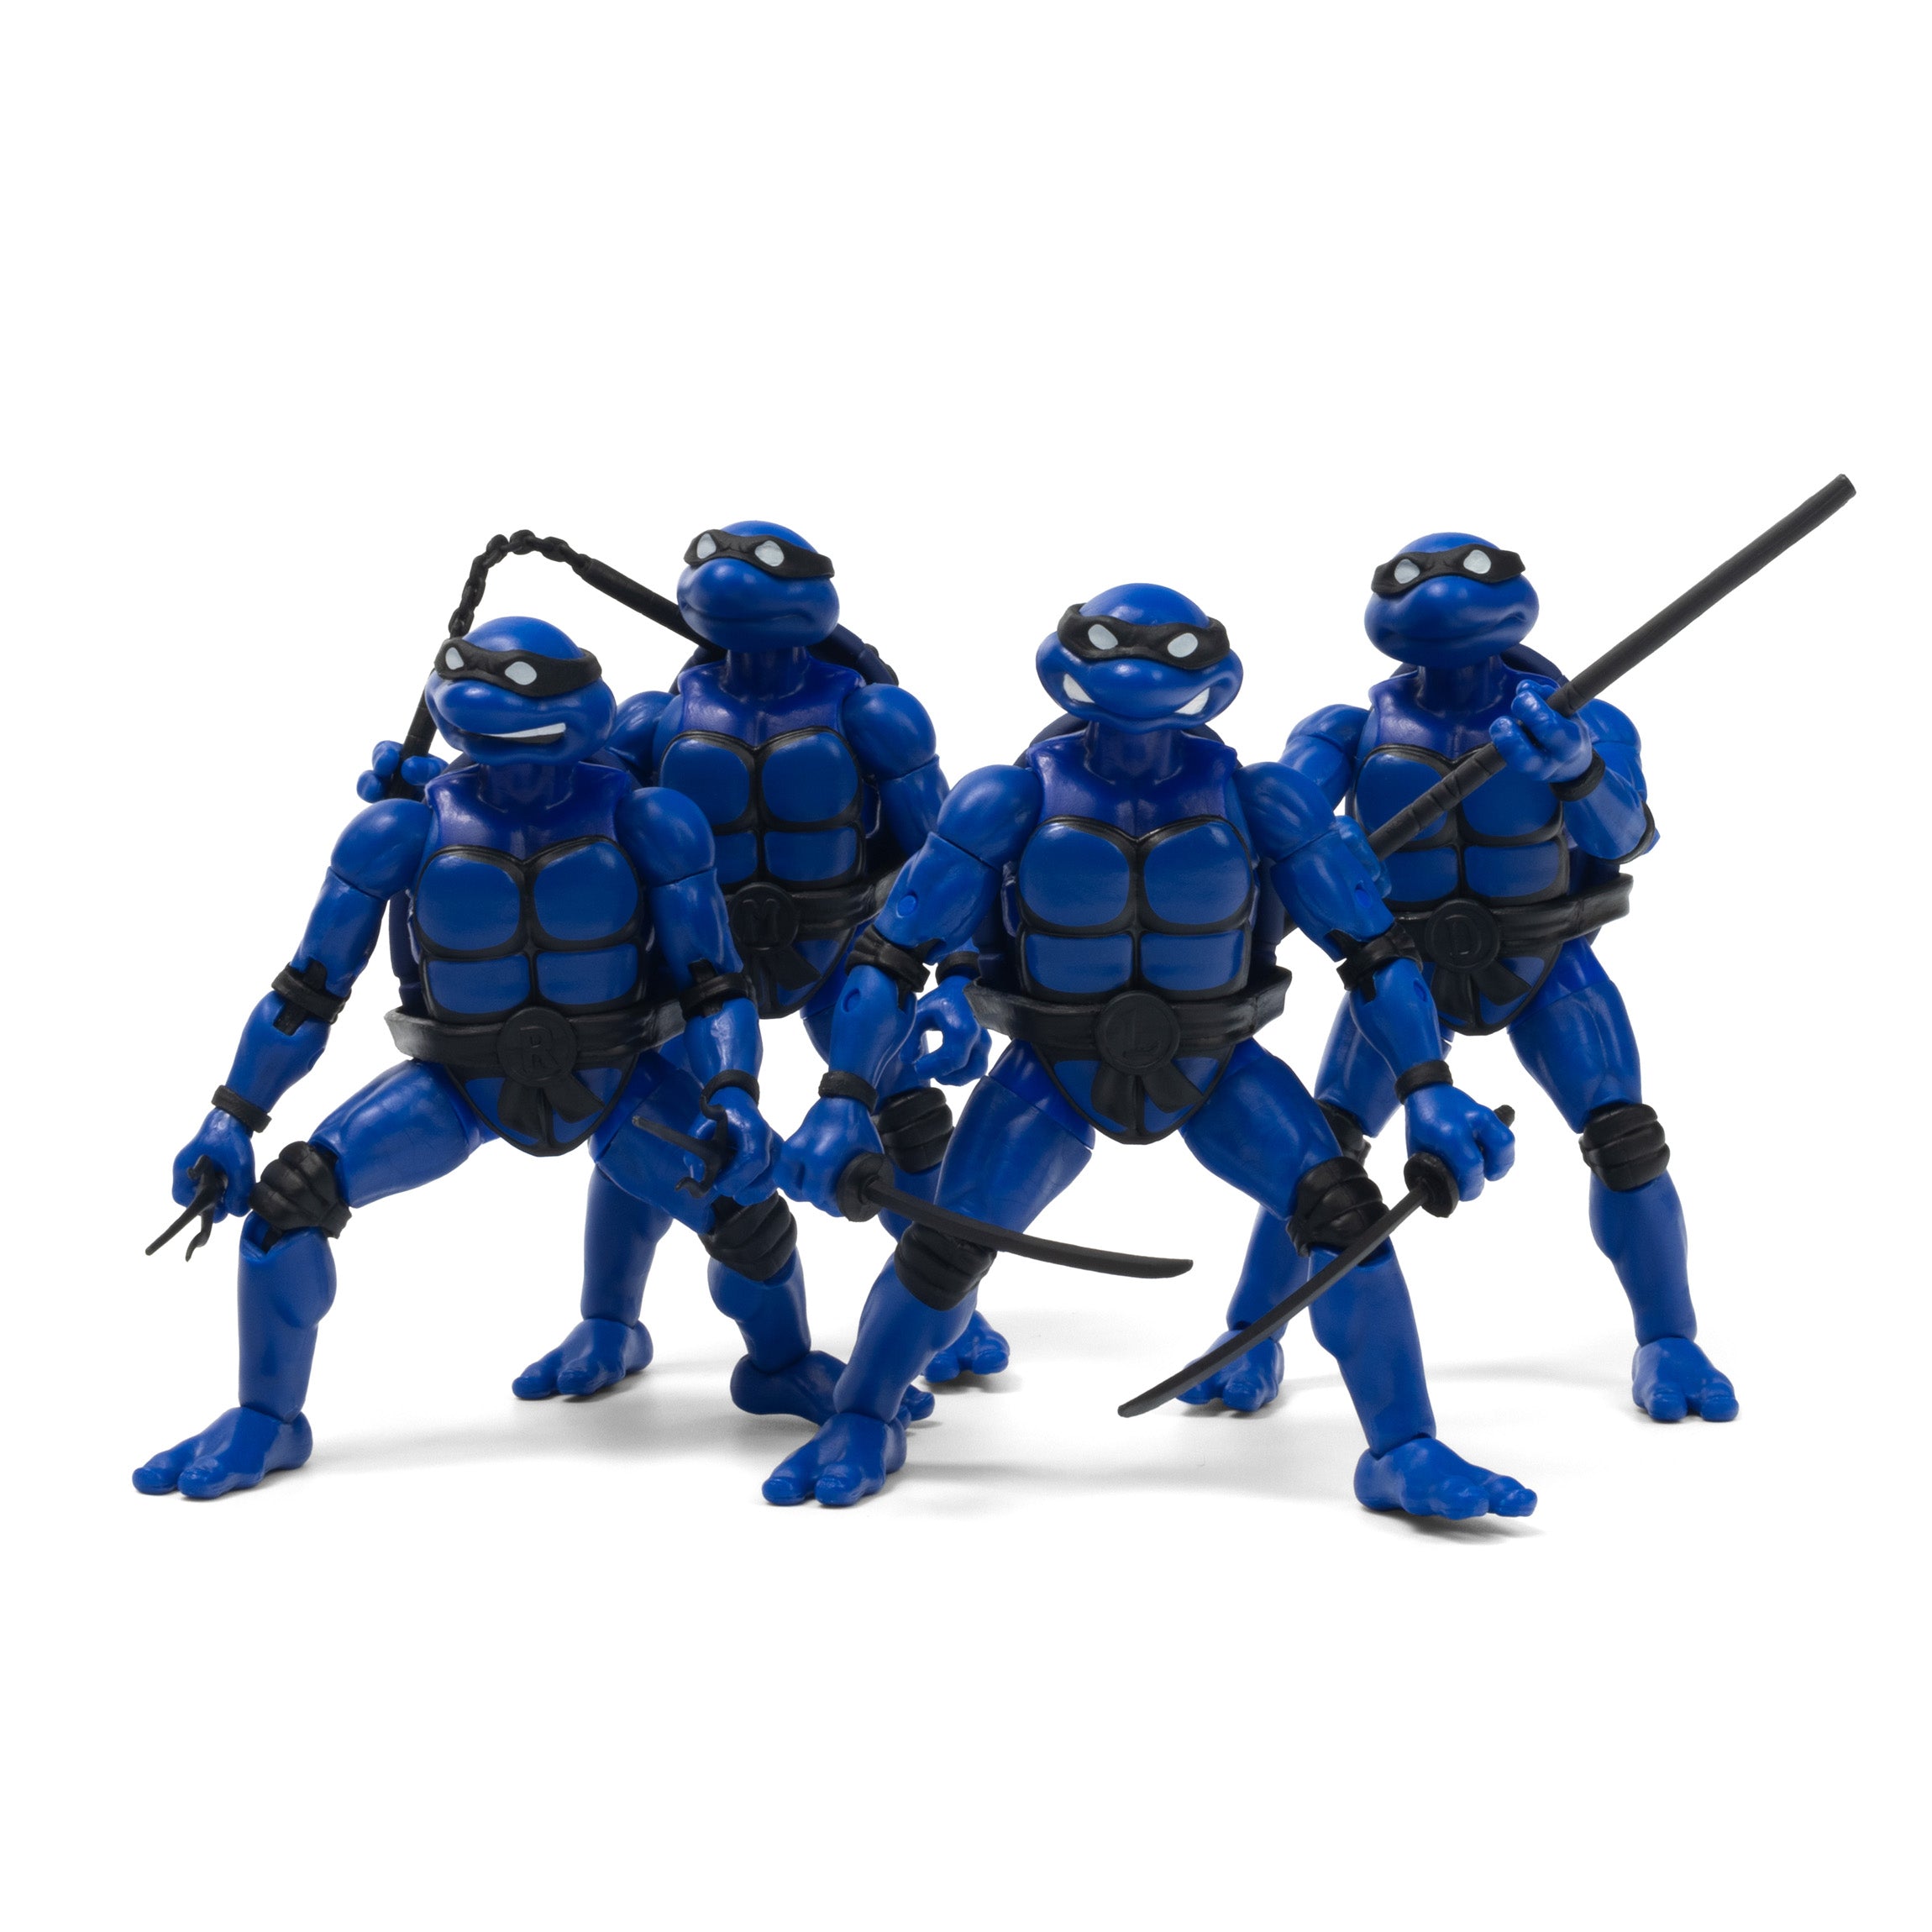 TMNT BST AXN Turtles Midnight 4-Pack – The Loyal Subjects